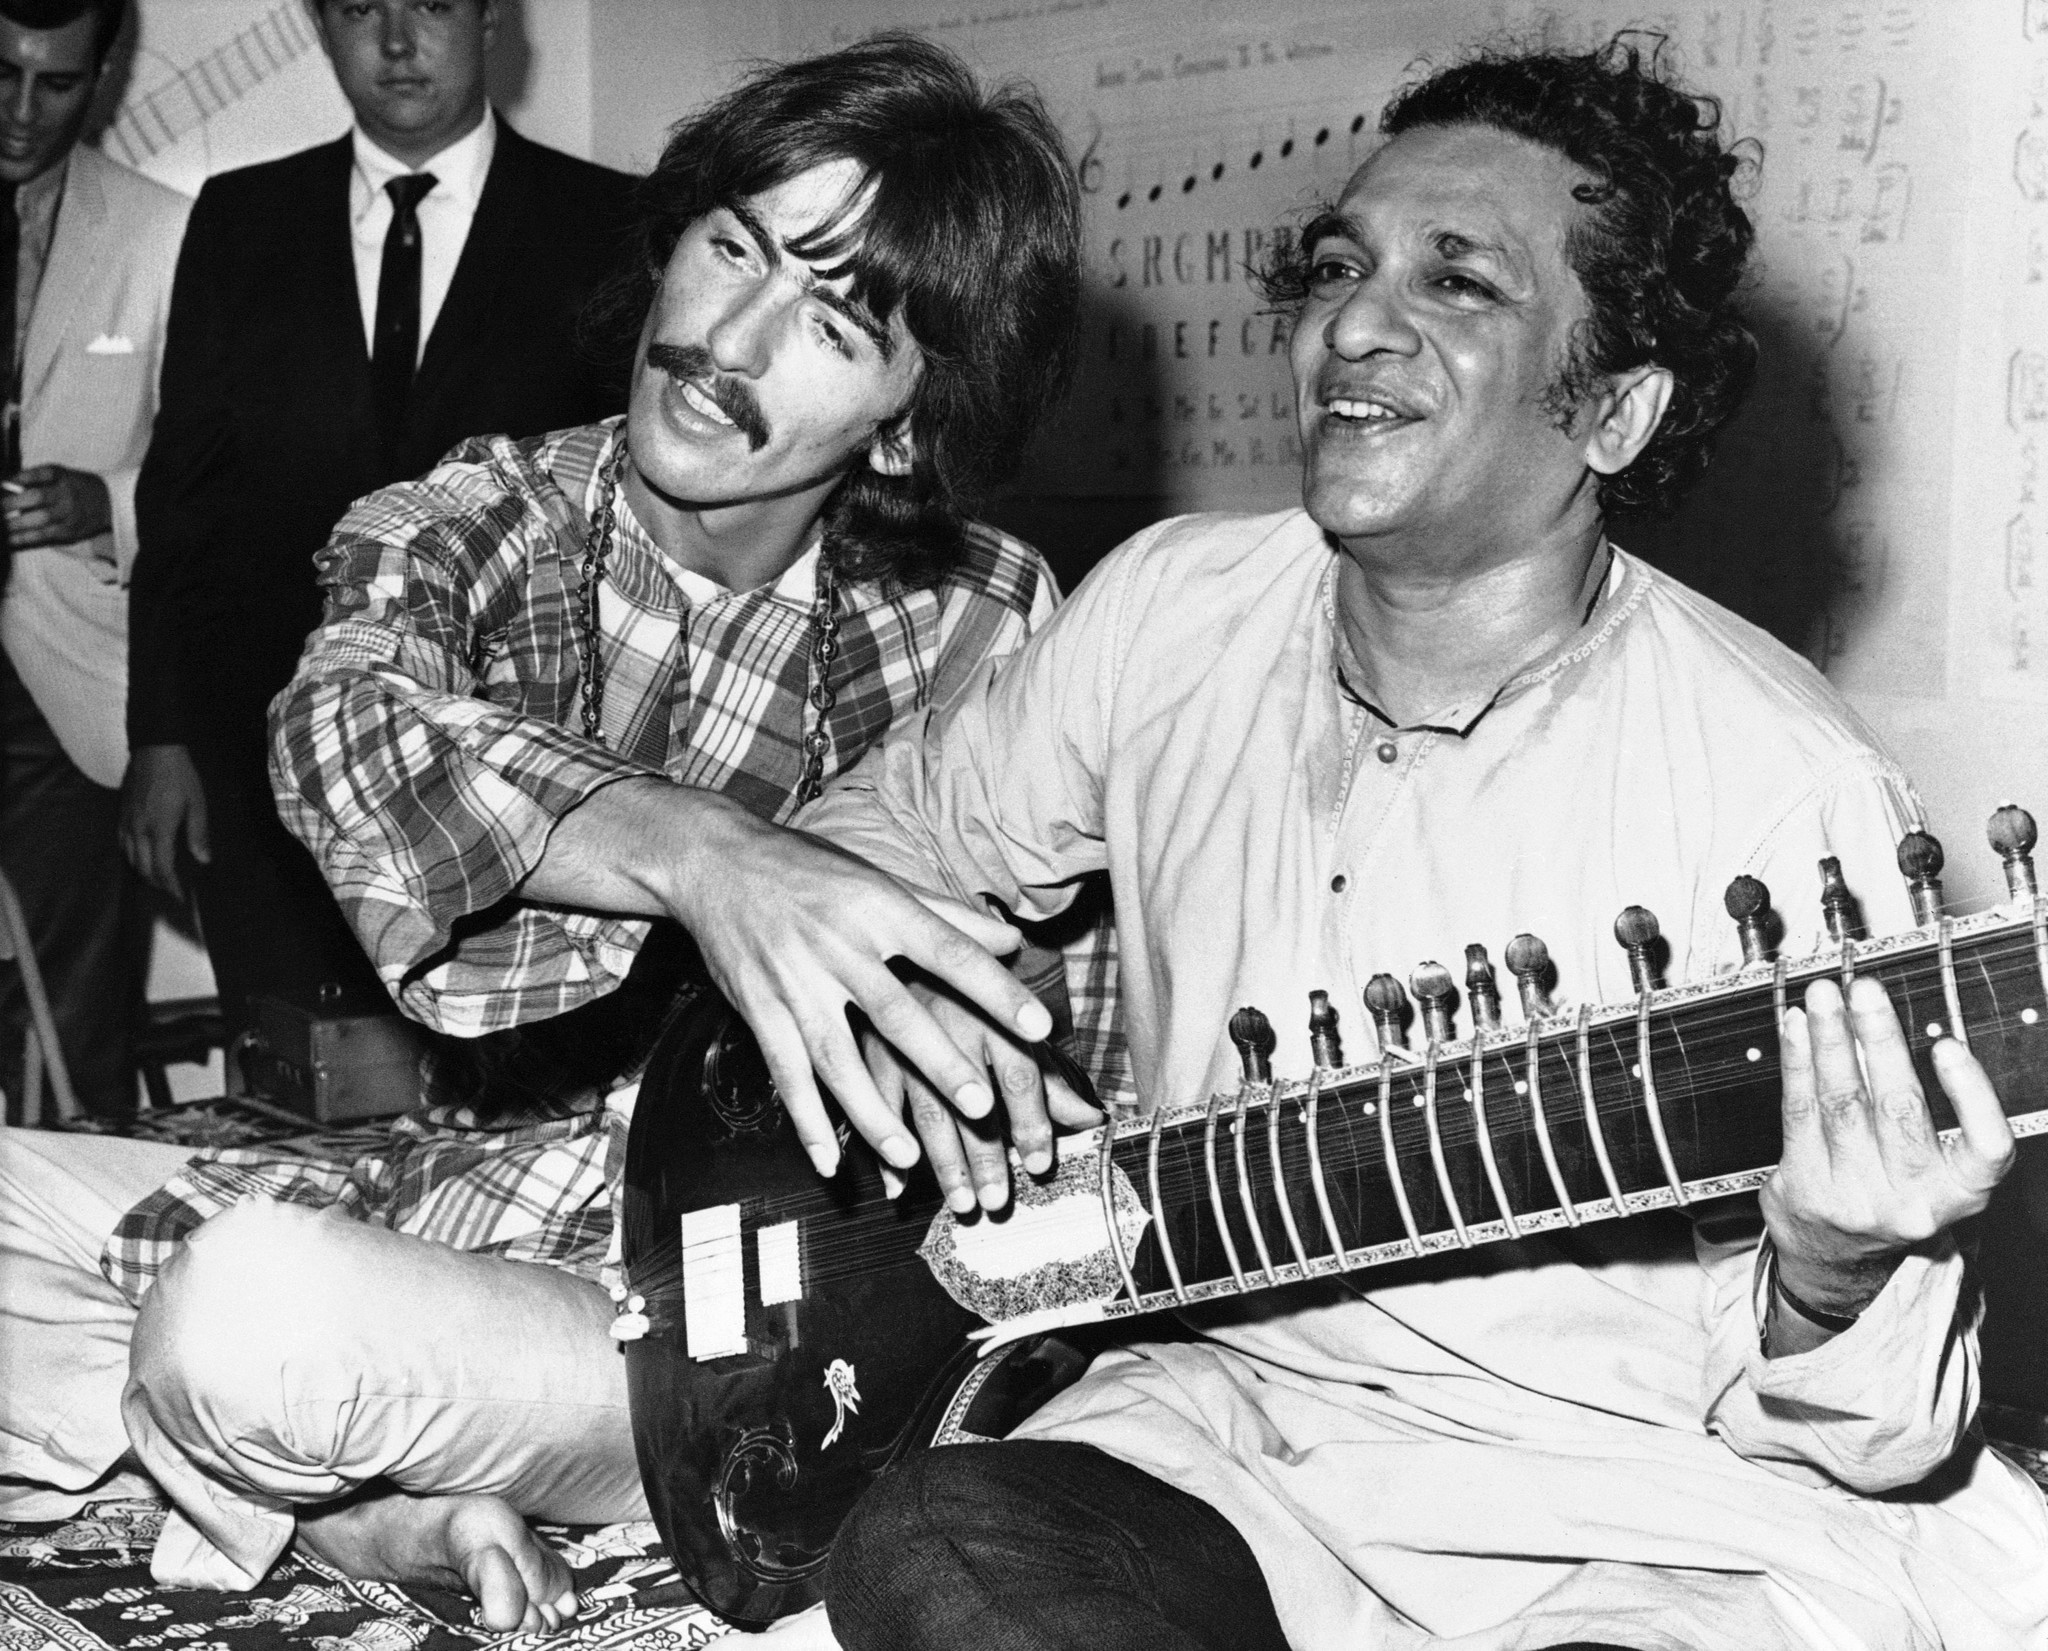 George Harrison, left, sits cross-legged with his musical mentor, Ravi Shankar of India, on Aug. 3, 1967 in Los Angeles, as Harrison explains to newsmen that Shankar is teaching him to play the sitar.